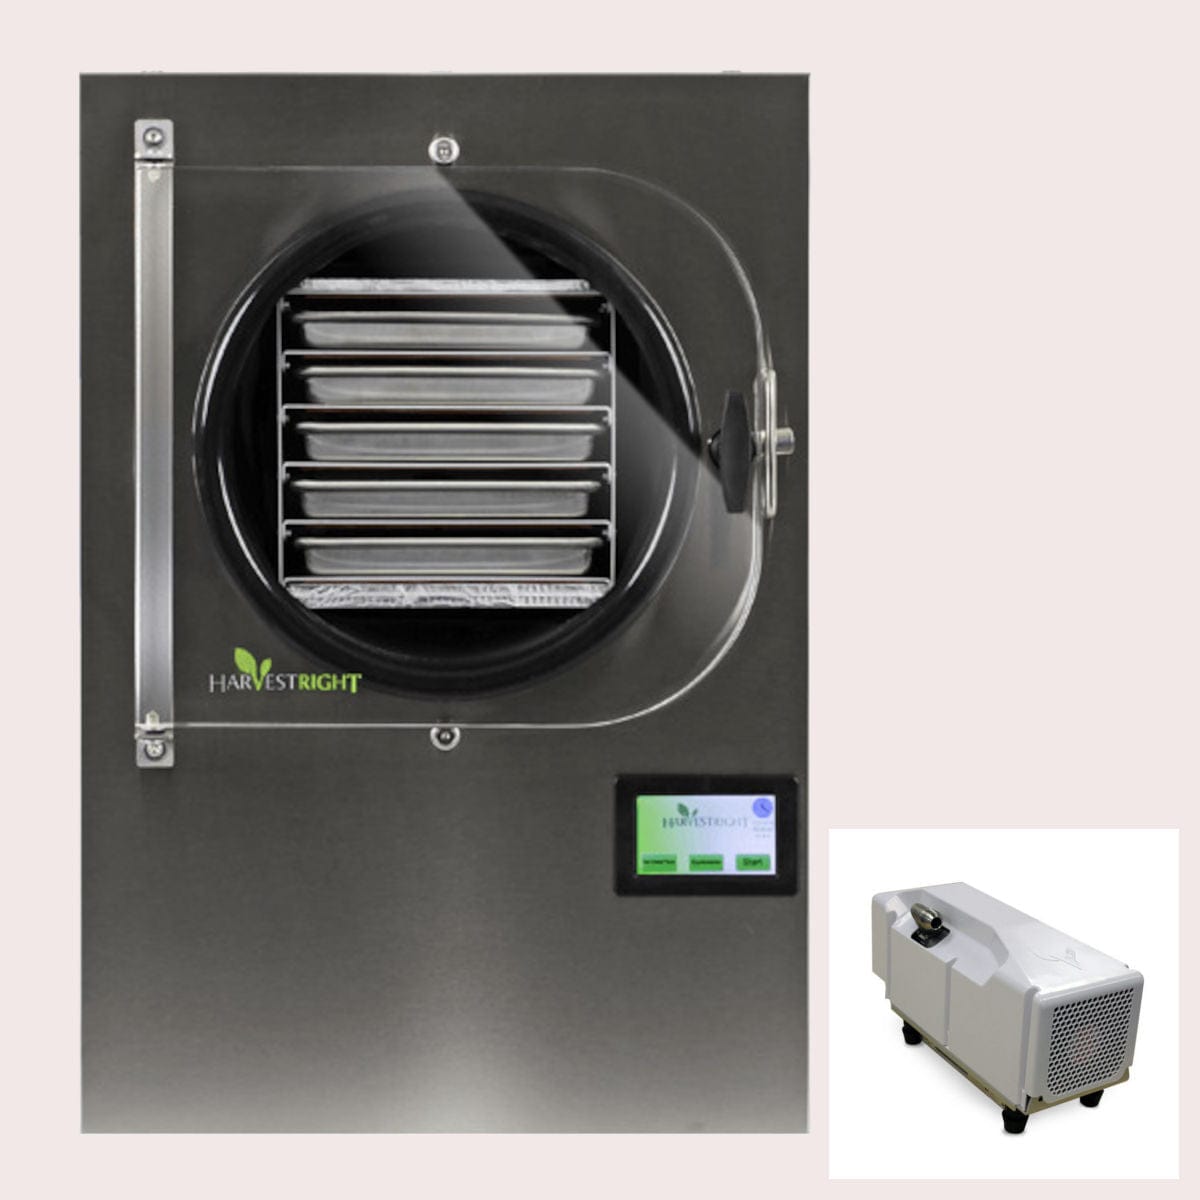 Harvest Right | Pharmaceutical Freeze Dryer Small with Oil-Free Vacuum Pump